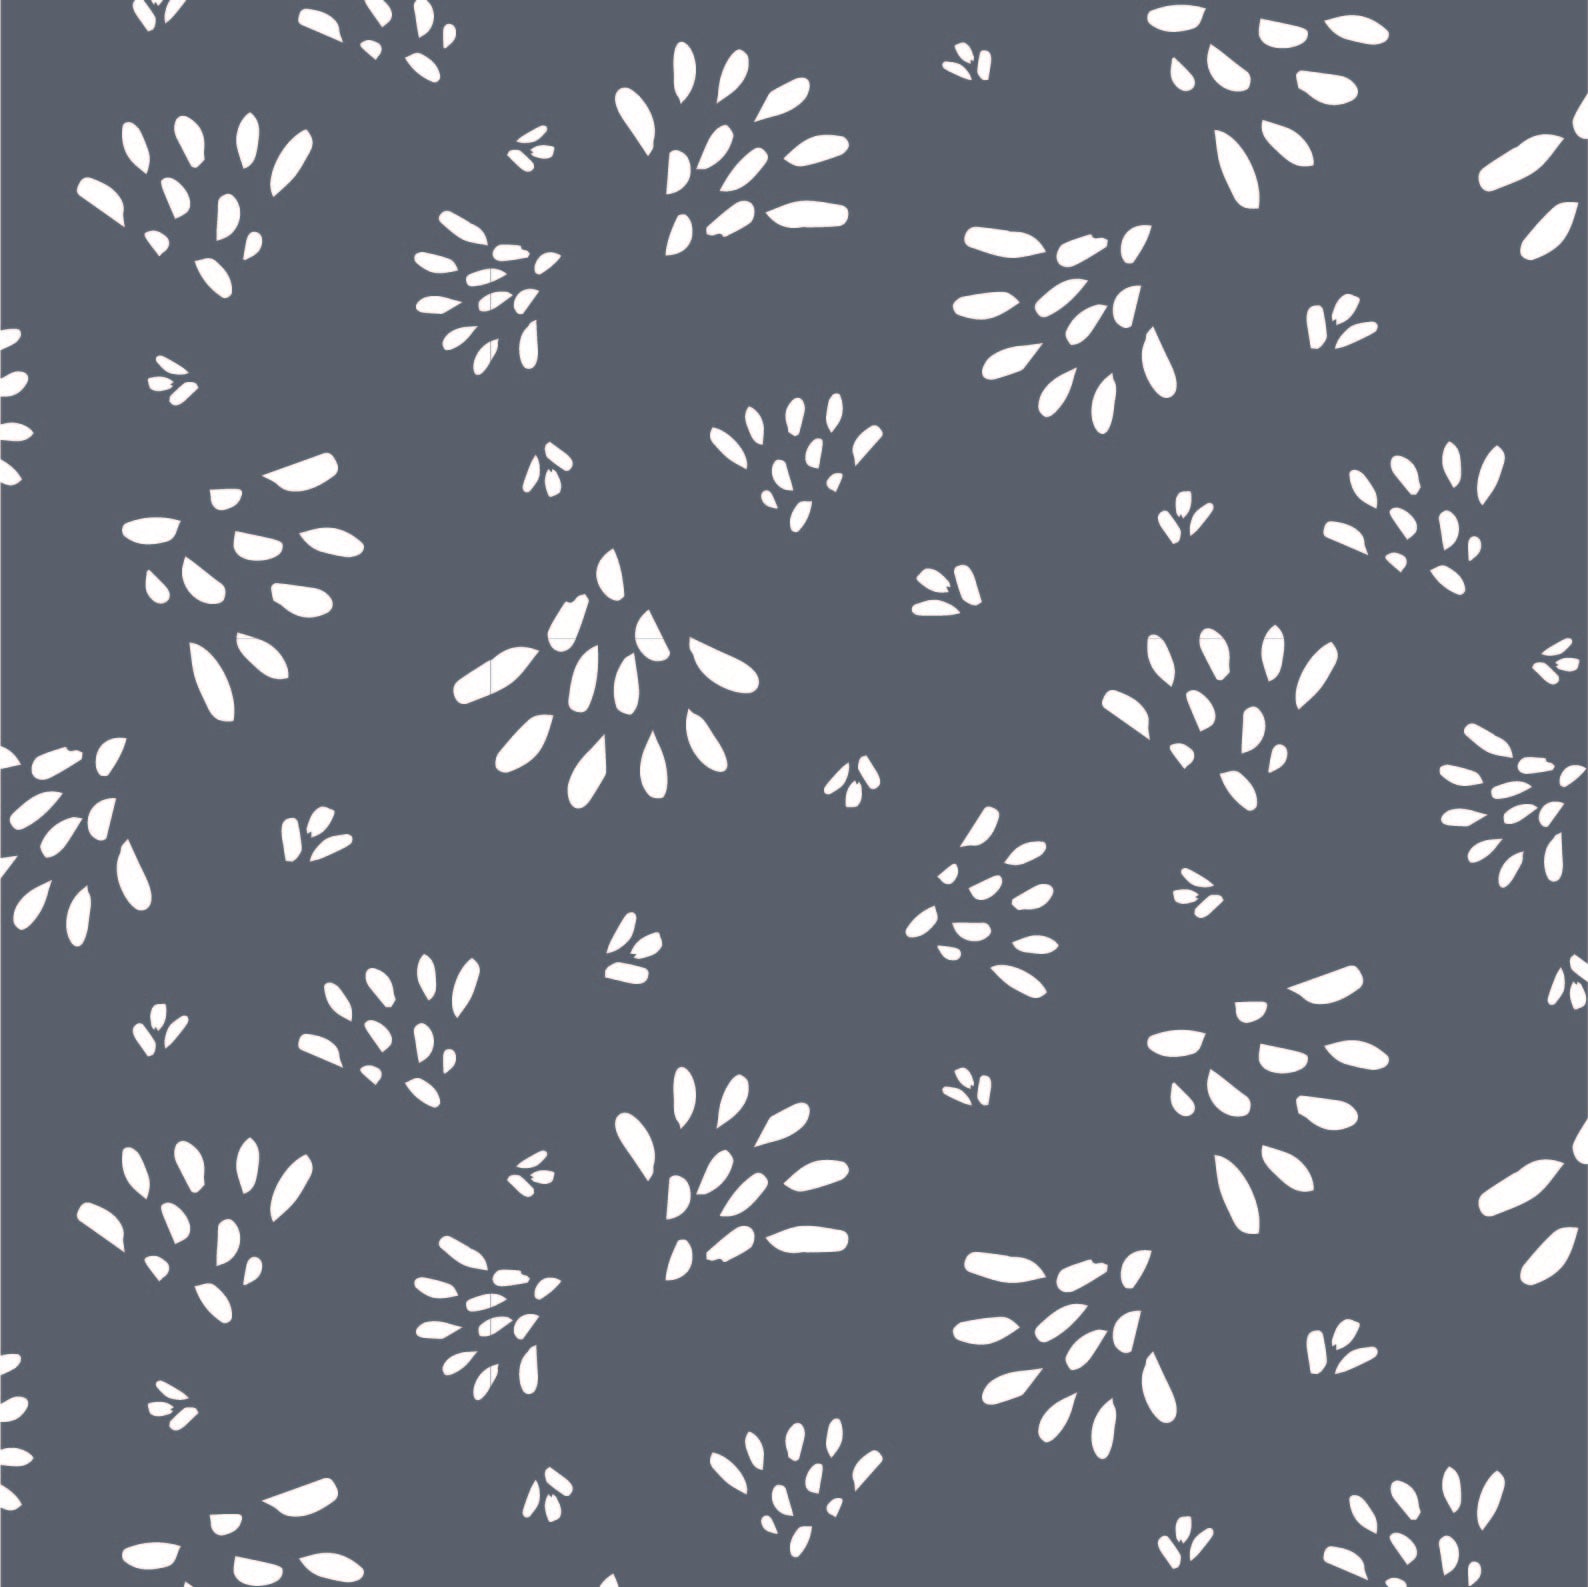 surface-pattern-design-abstract-floral